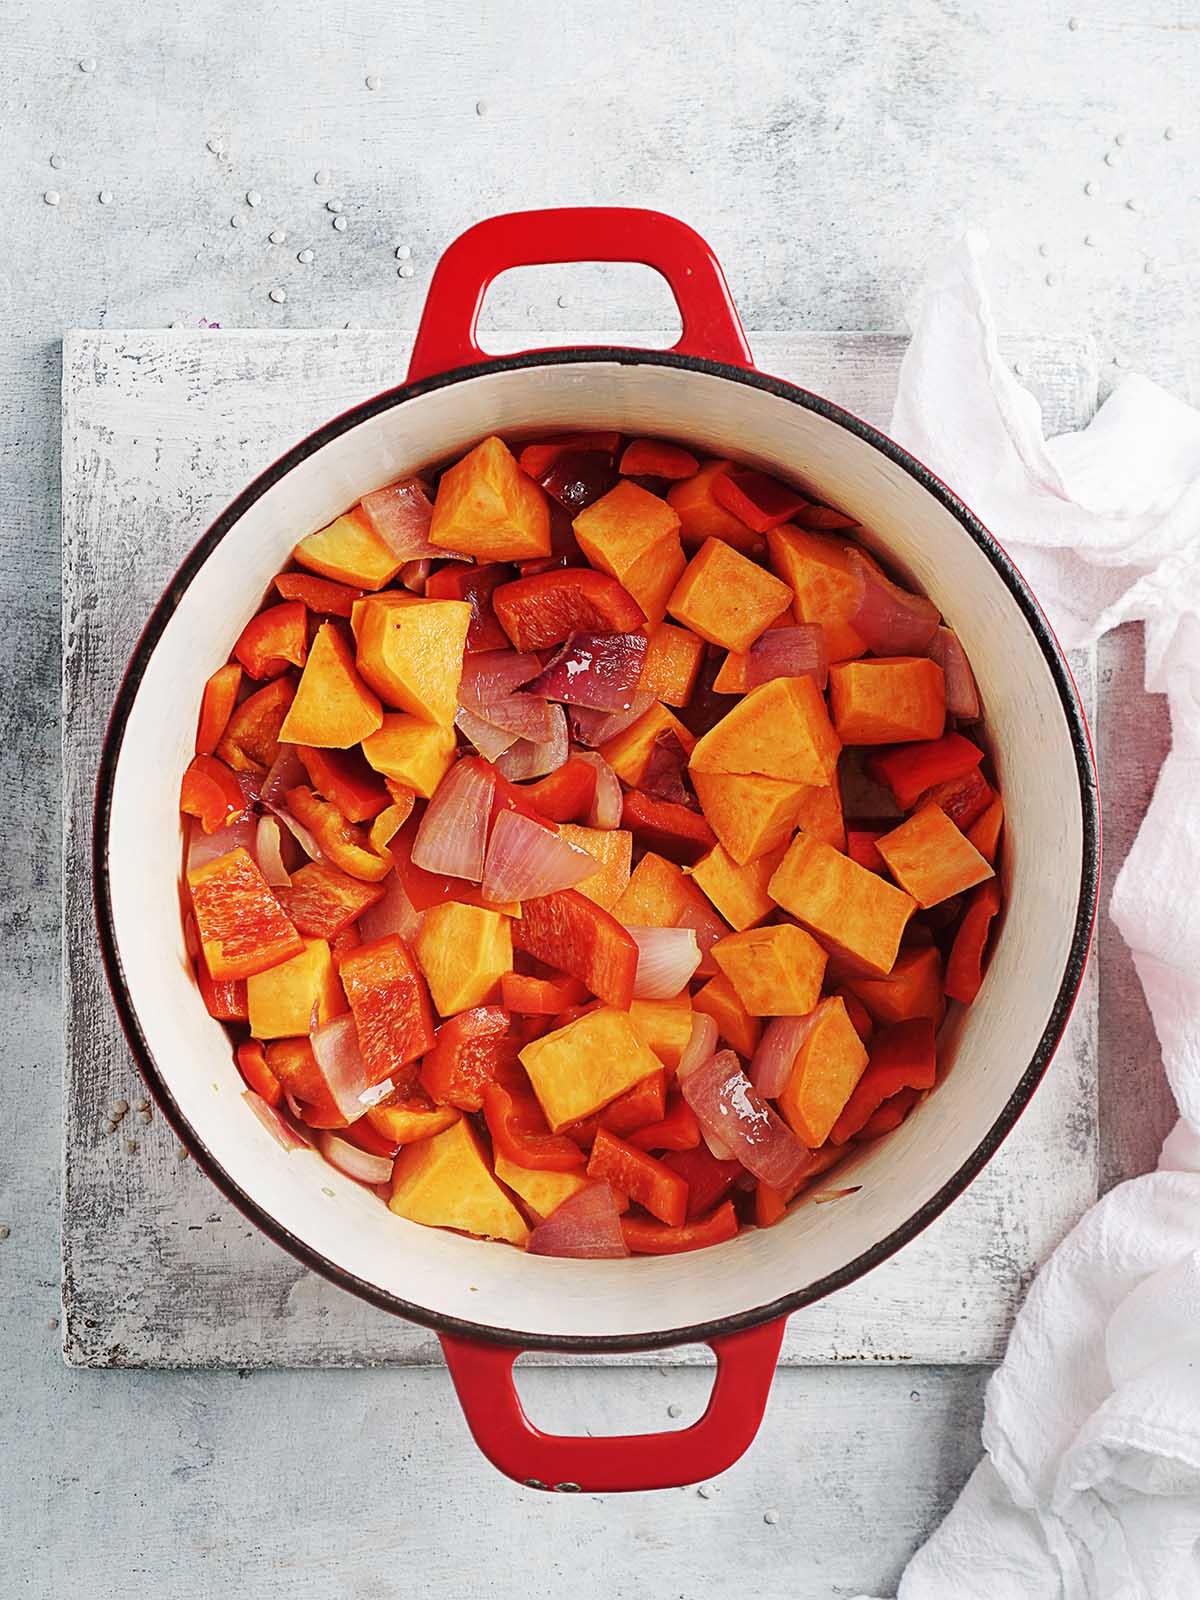 Sauteing pumpkin, sweet potato and red pepper in a large pot.